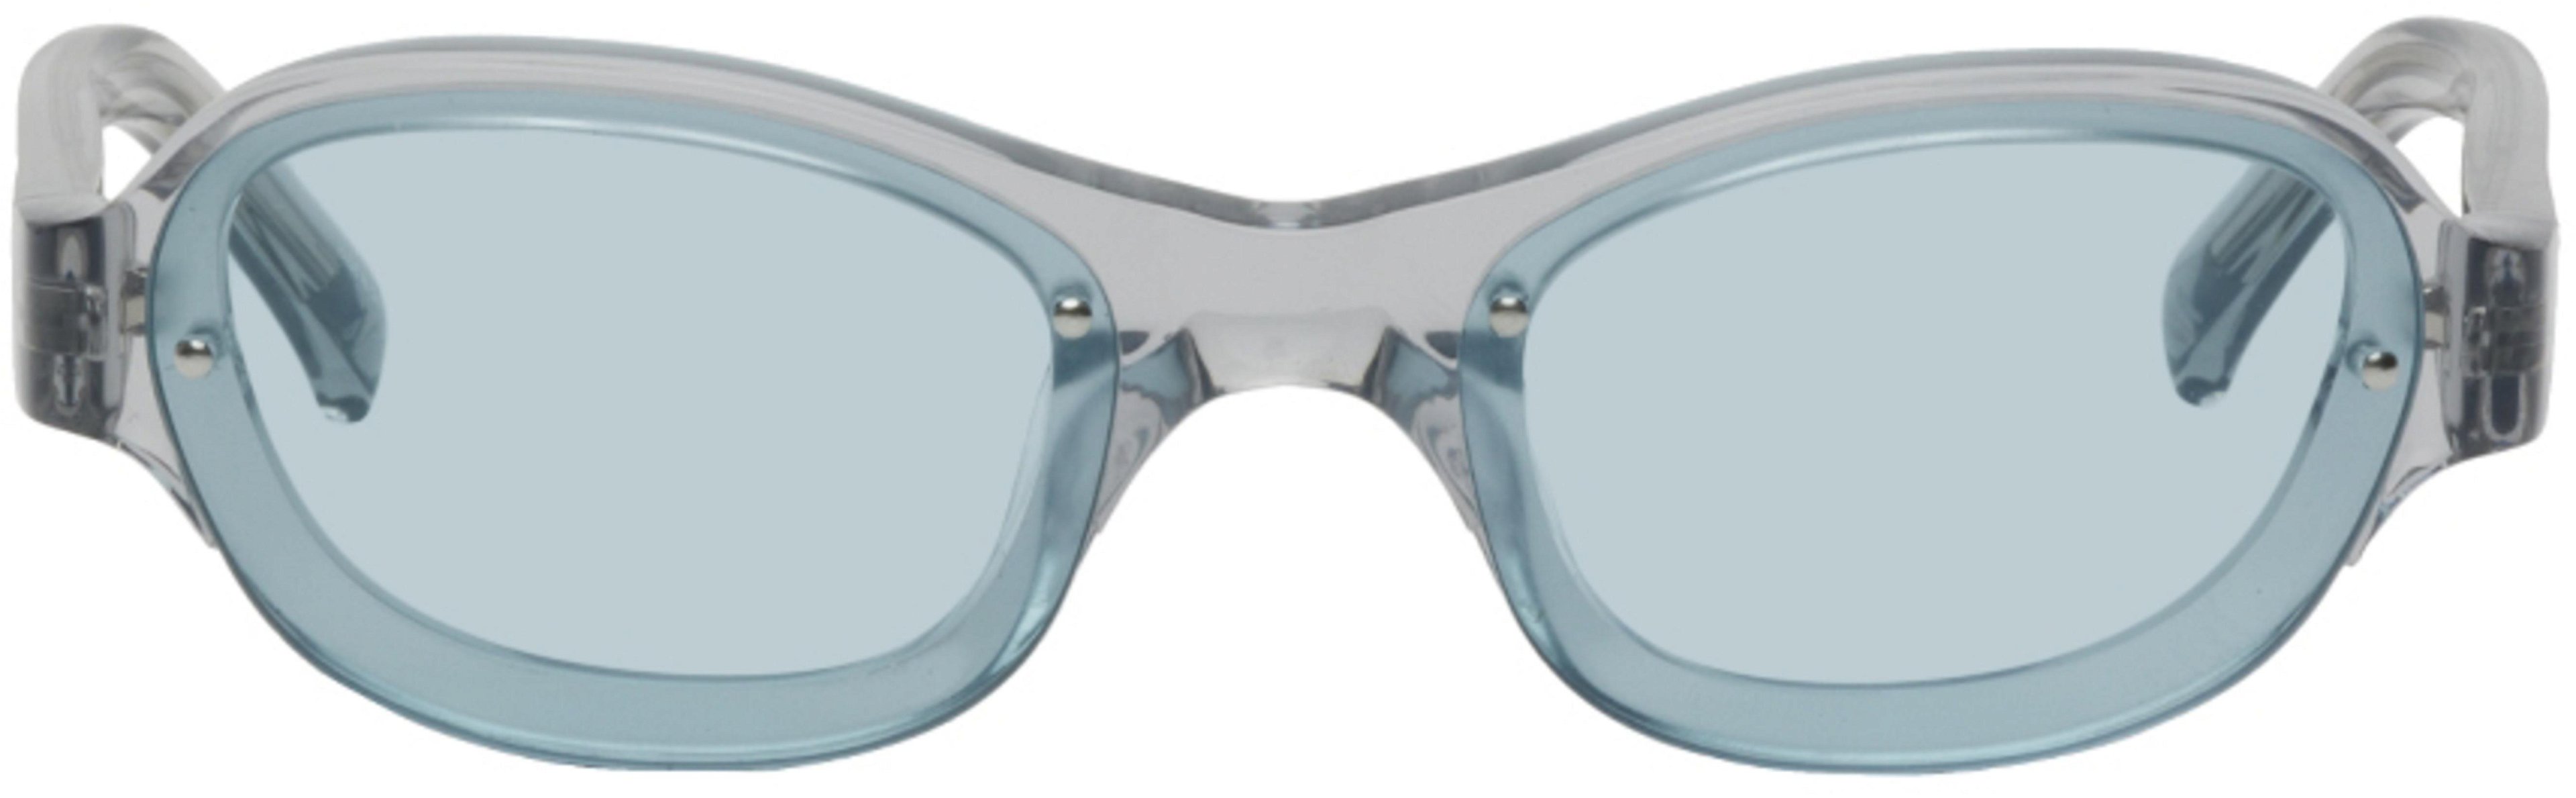 SSENSE Exclusive Gray & Blue Skye Sunglasses by A BETTER FEELING